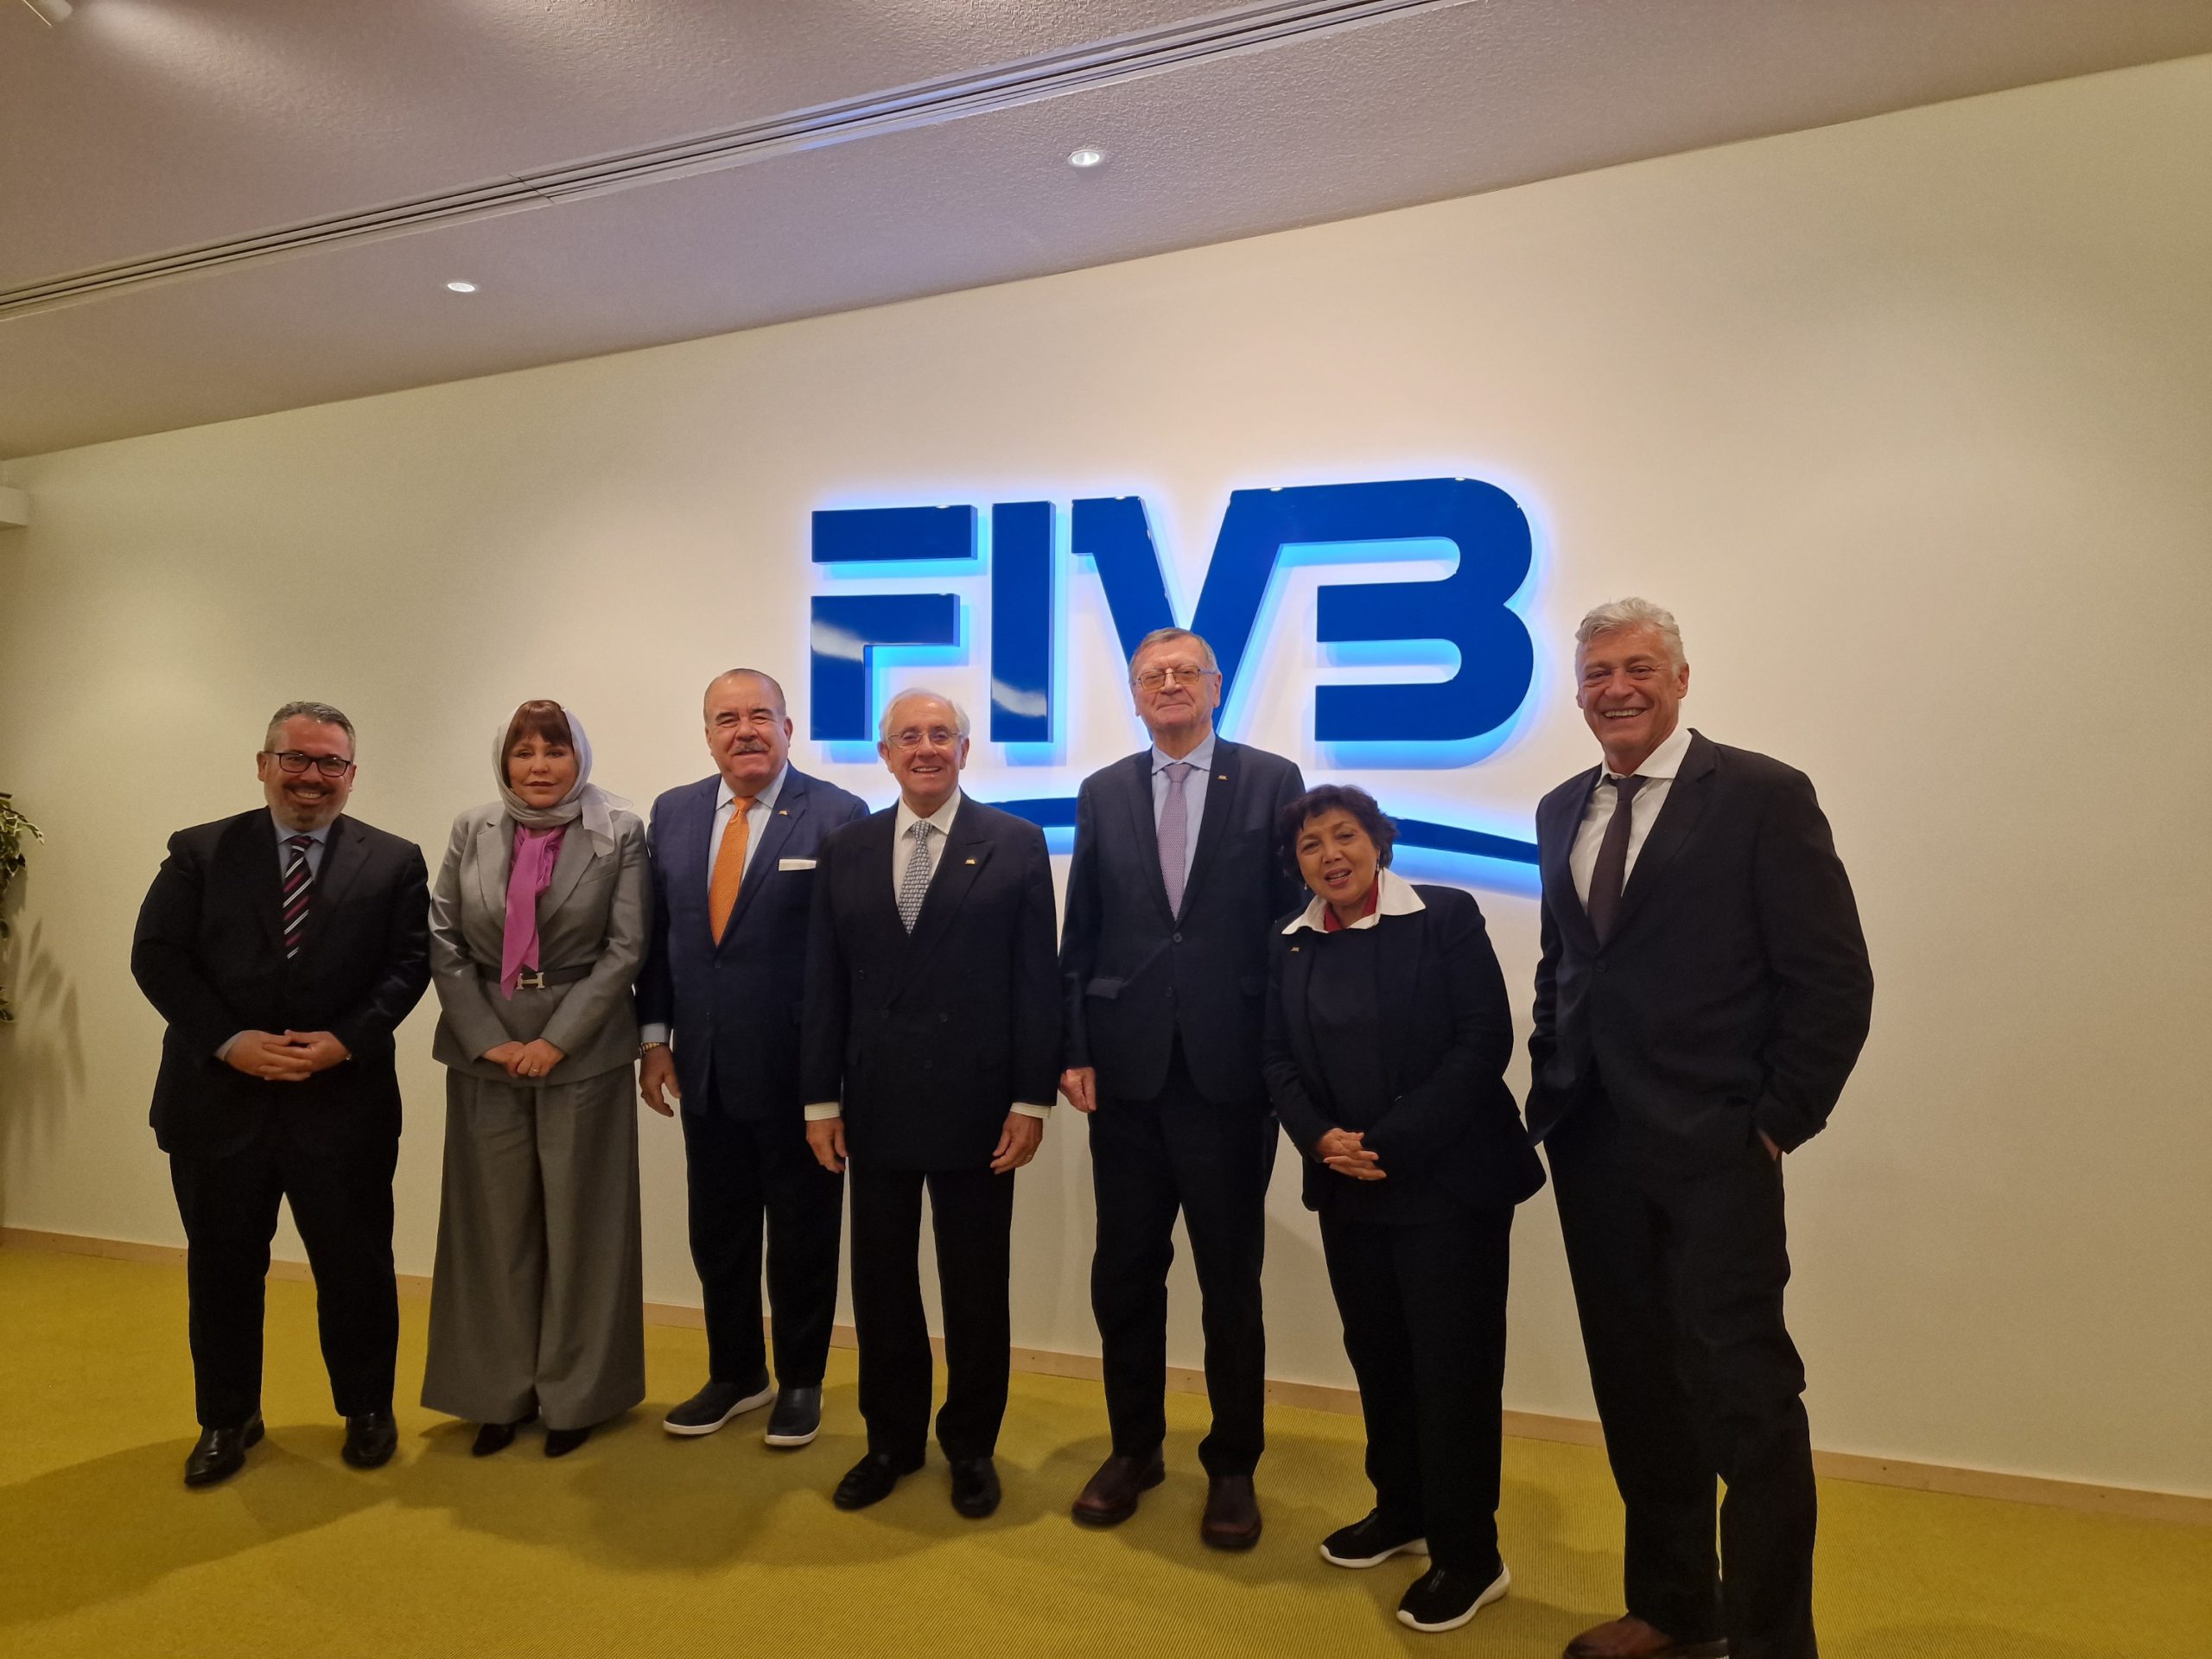 FIVB Executive Committee Looks Ahead To Volleyball’s Bright Future